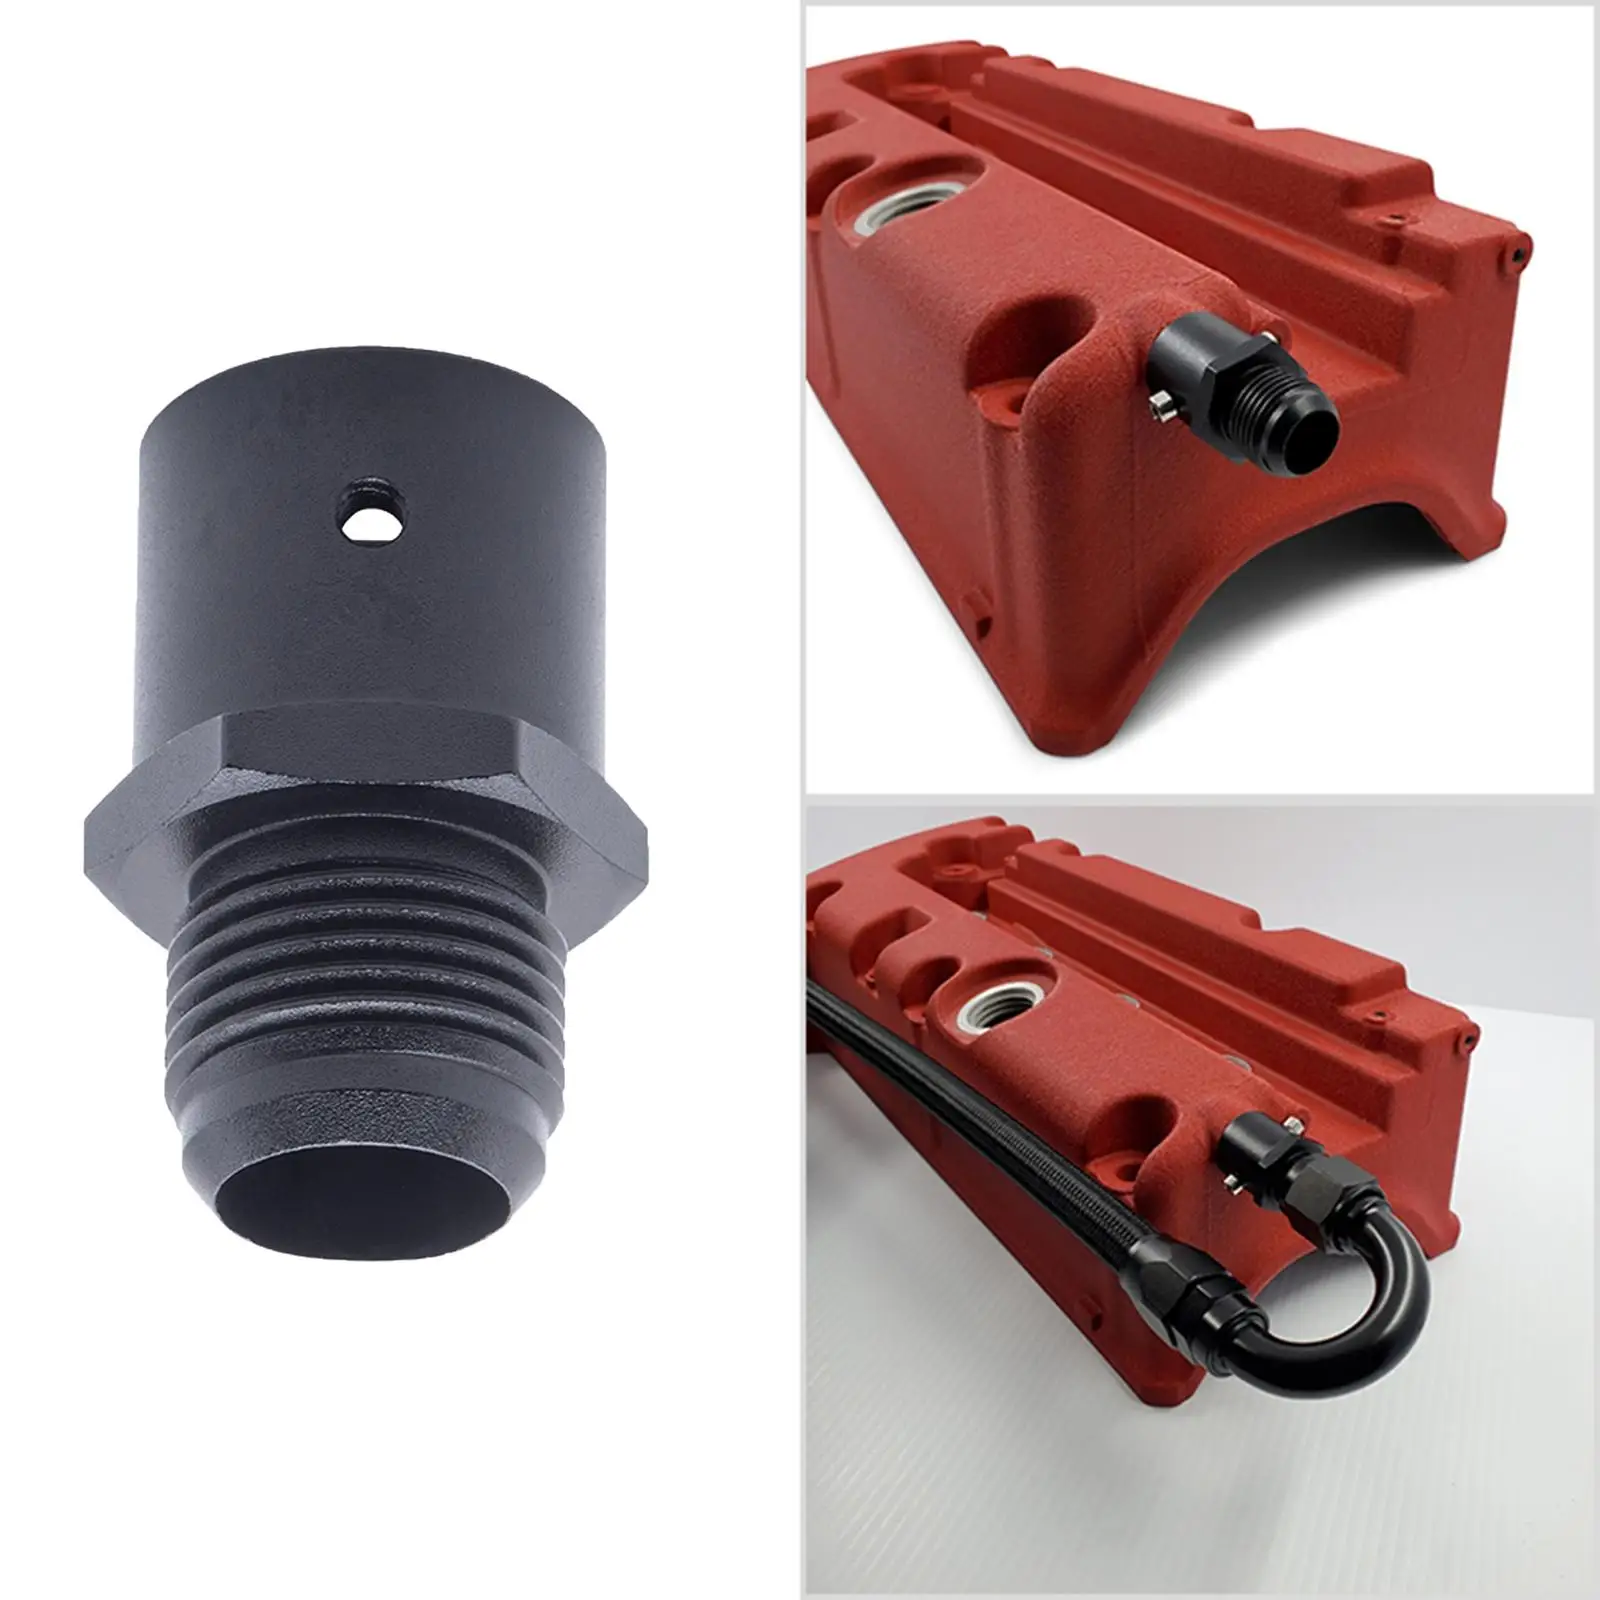 Breather Fitting Adapter Valve Cover 19mm Vent Connector Plug for Honda Civic SI 2002-2015 Acura Tsx 2003-2014